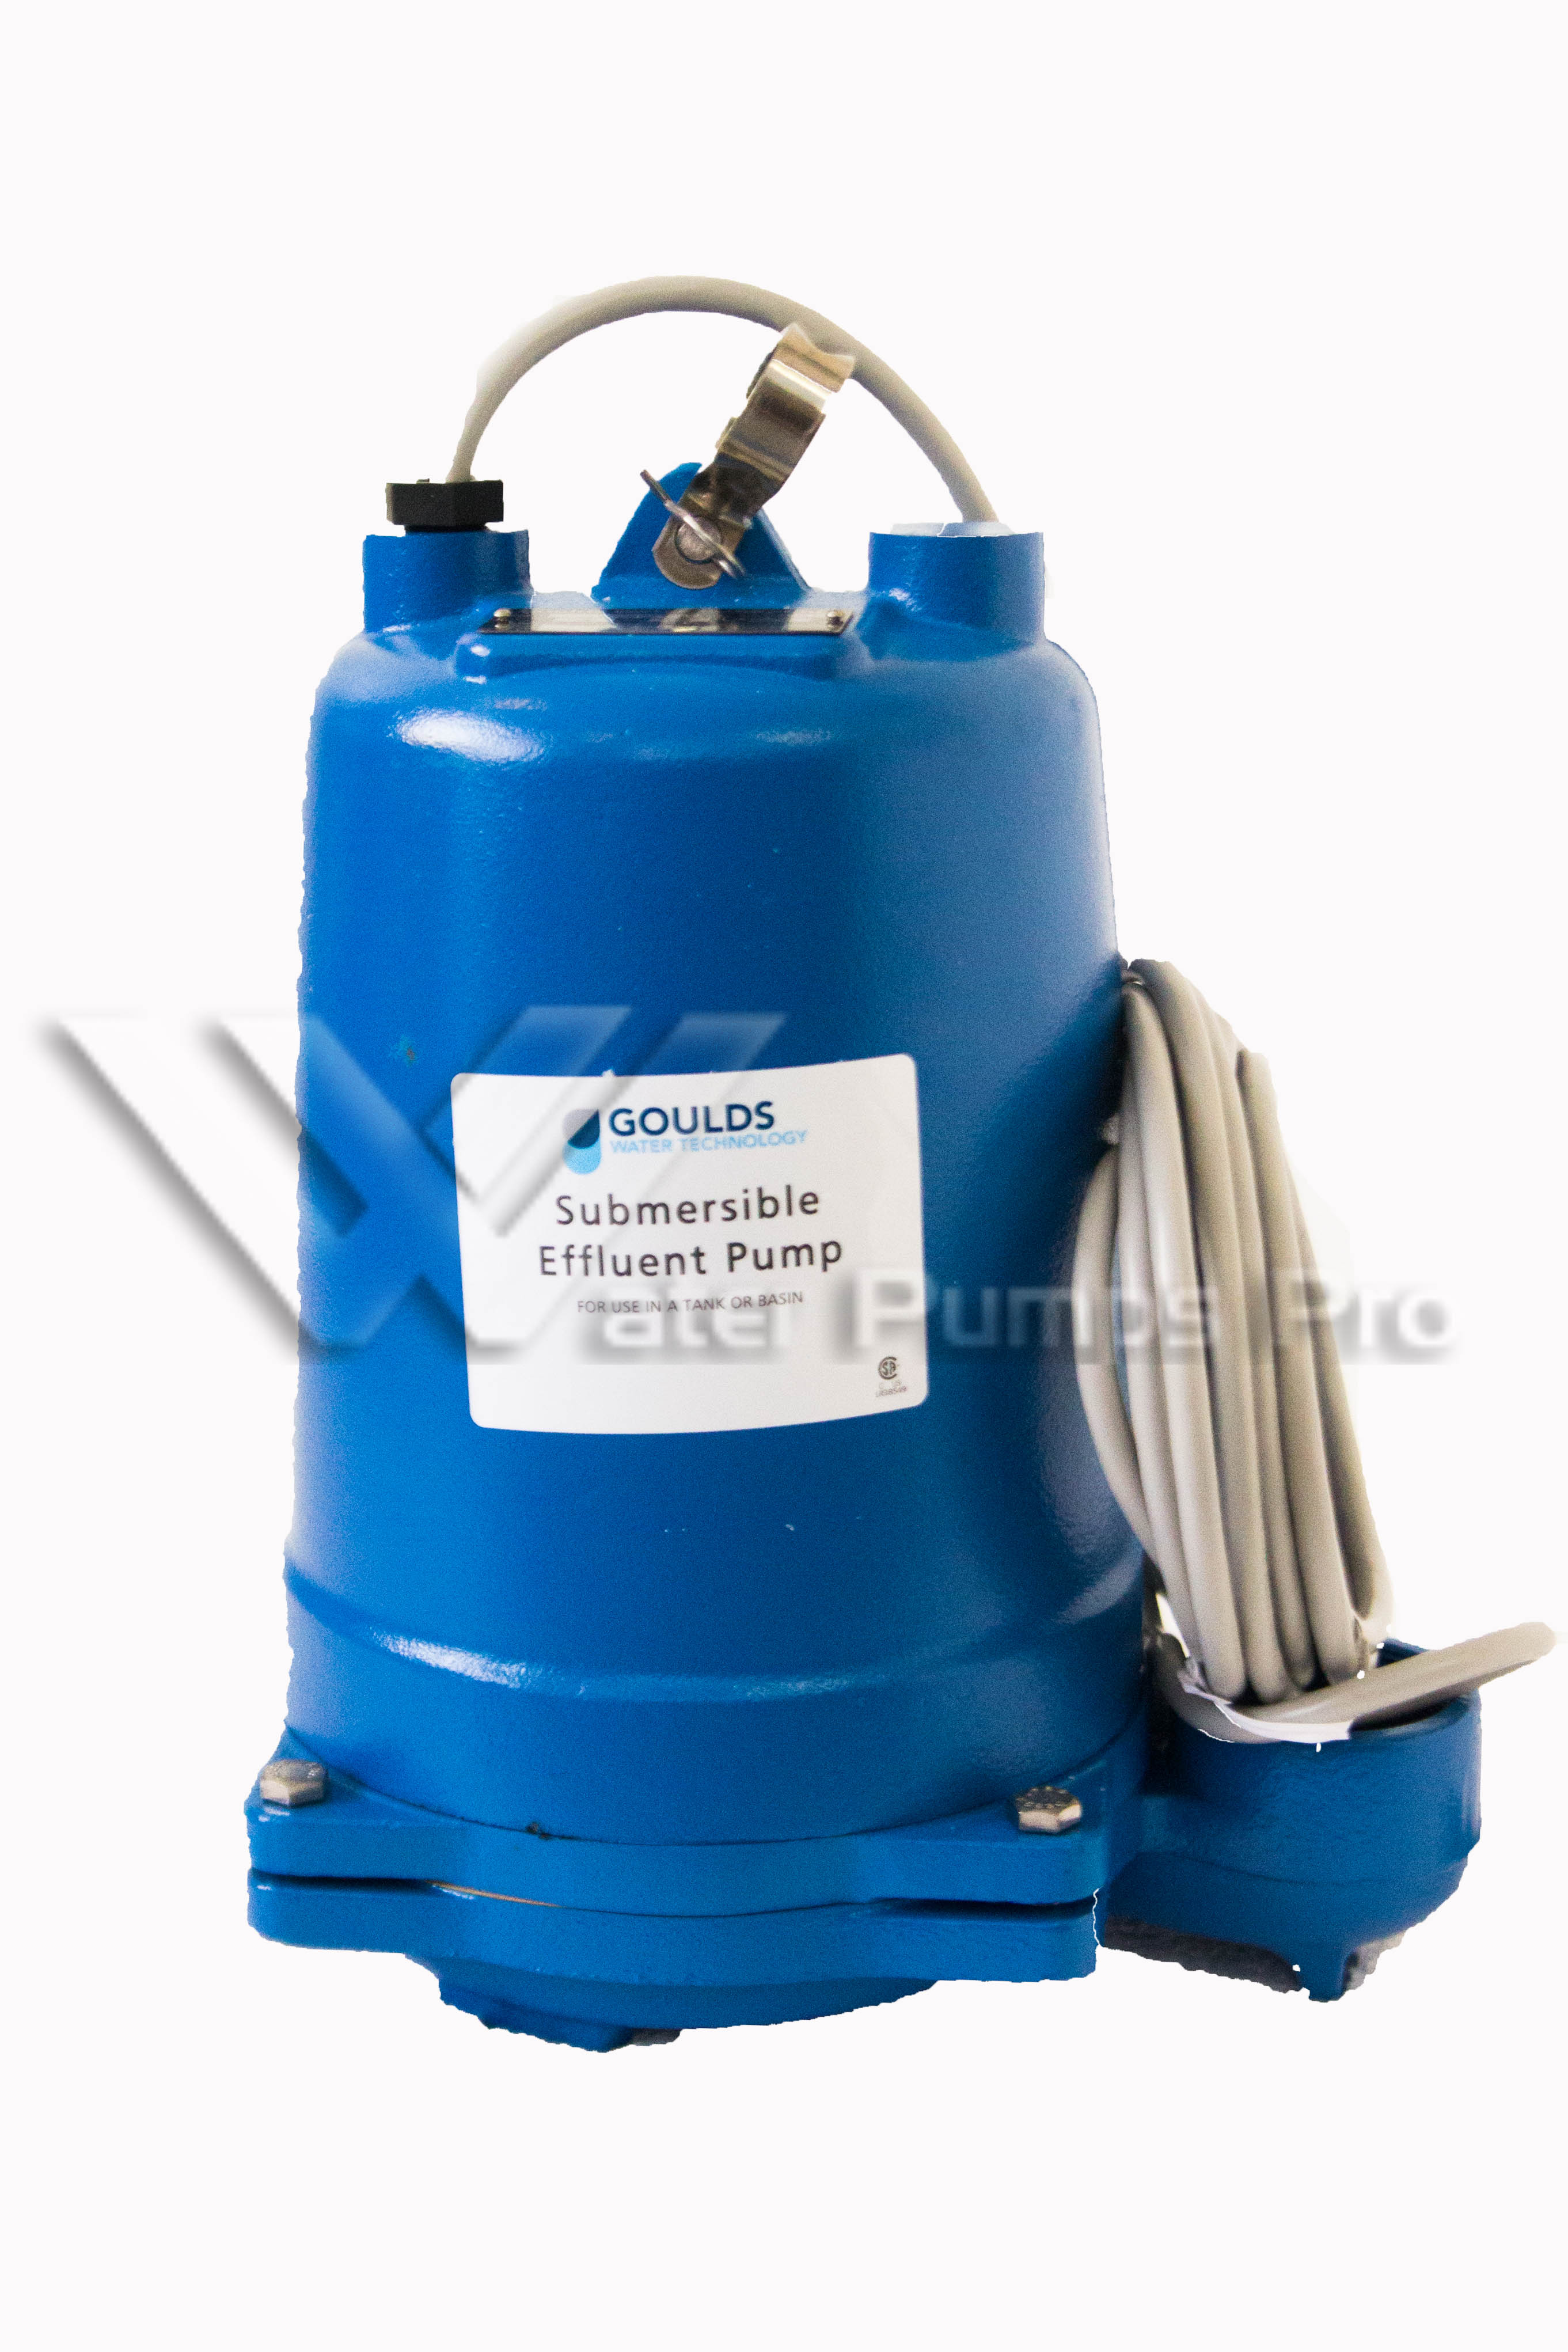 Goulds WE0312M 1/3 HP 230V Submersible Effuent Pump